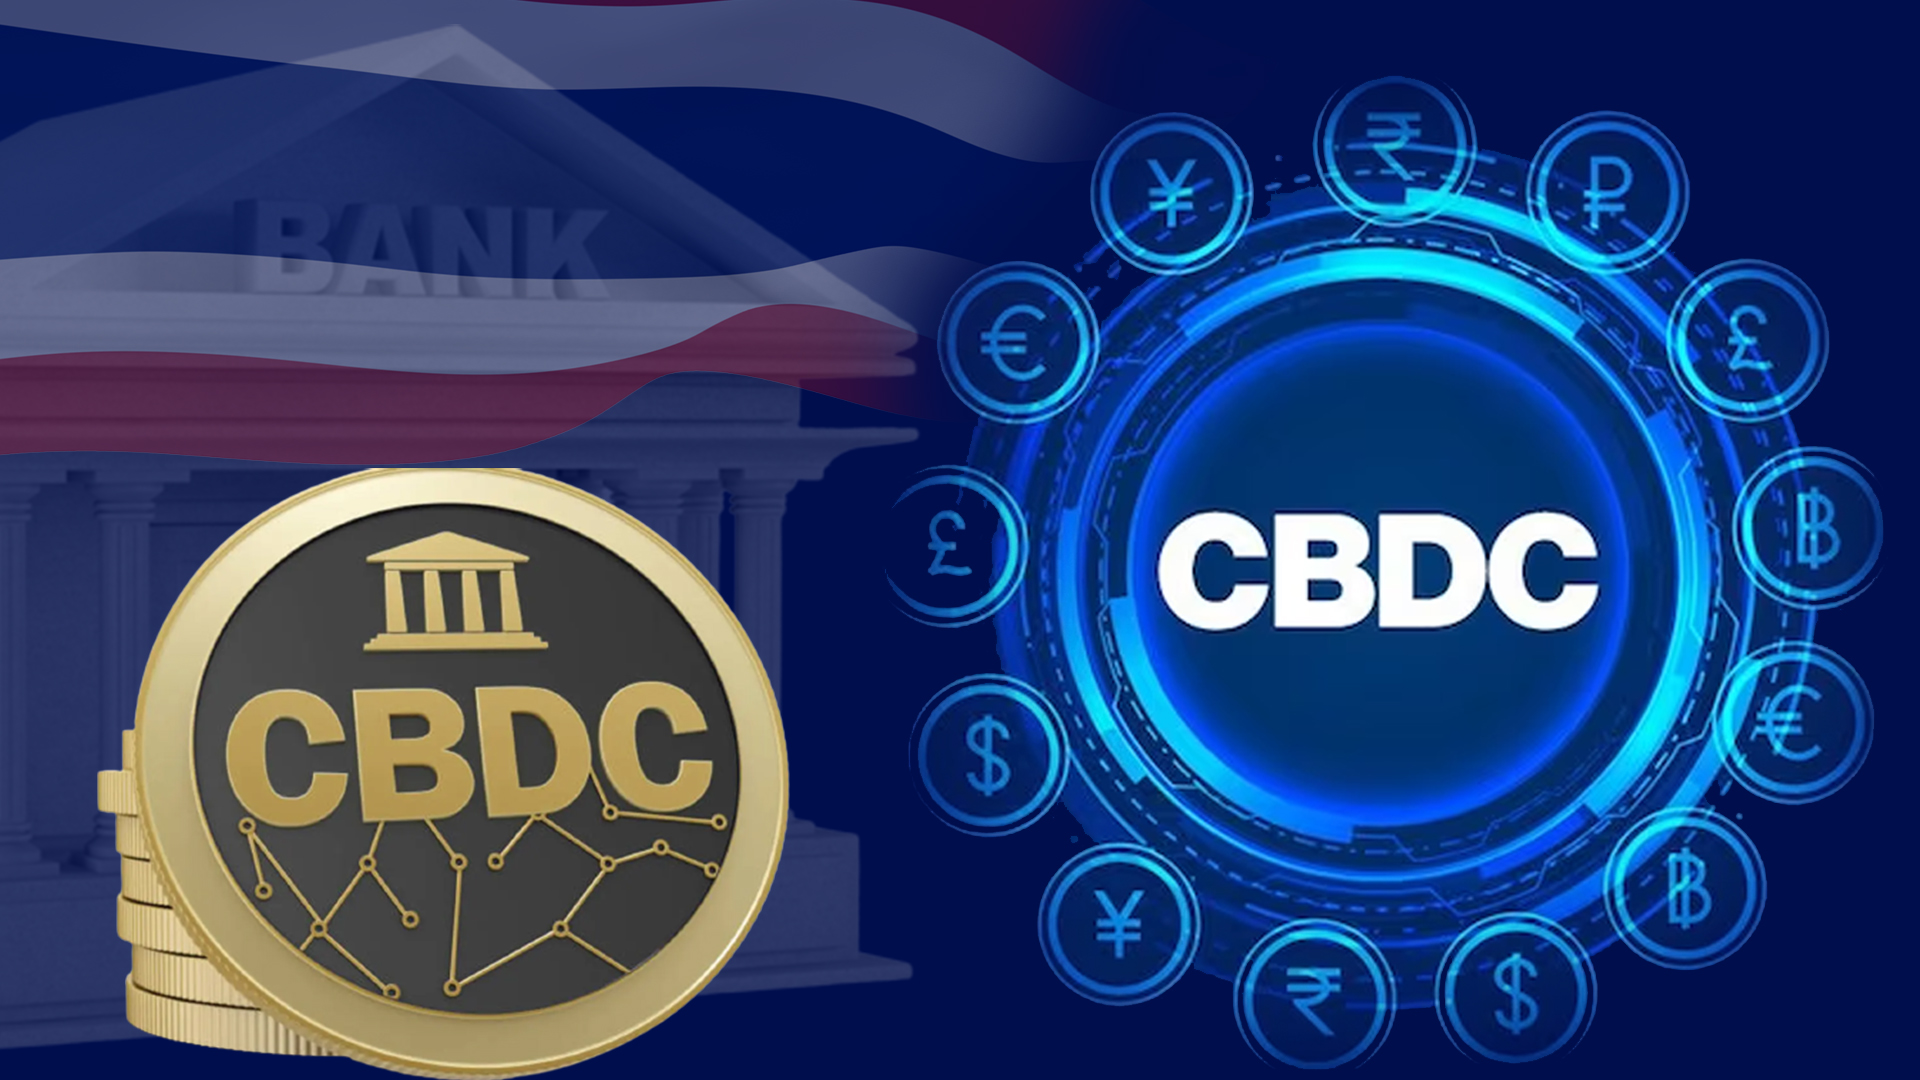 Thailand Banks Transforming their Payments via CBDC and mBridge